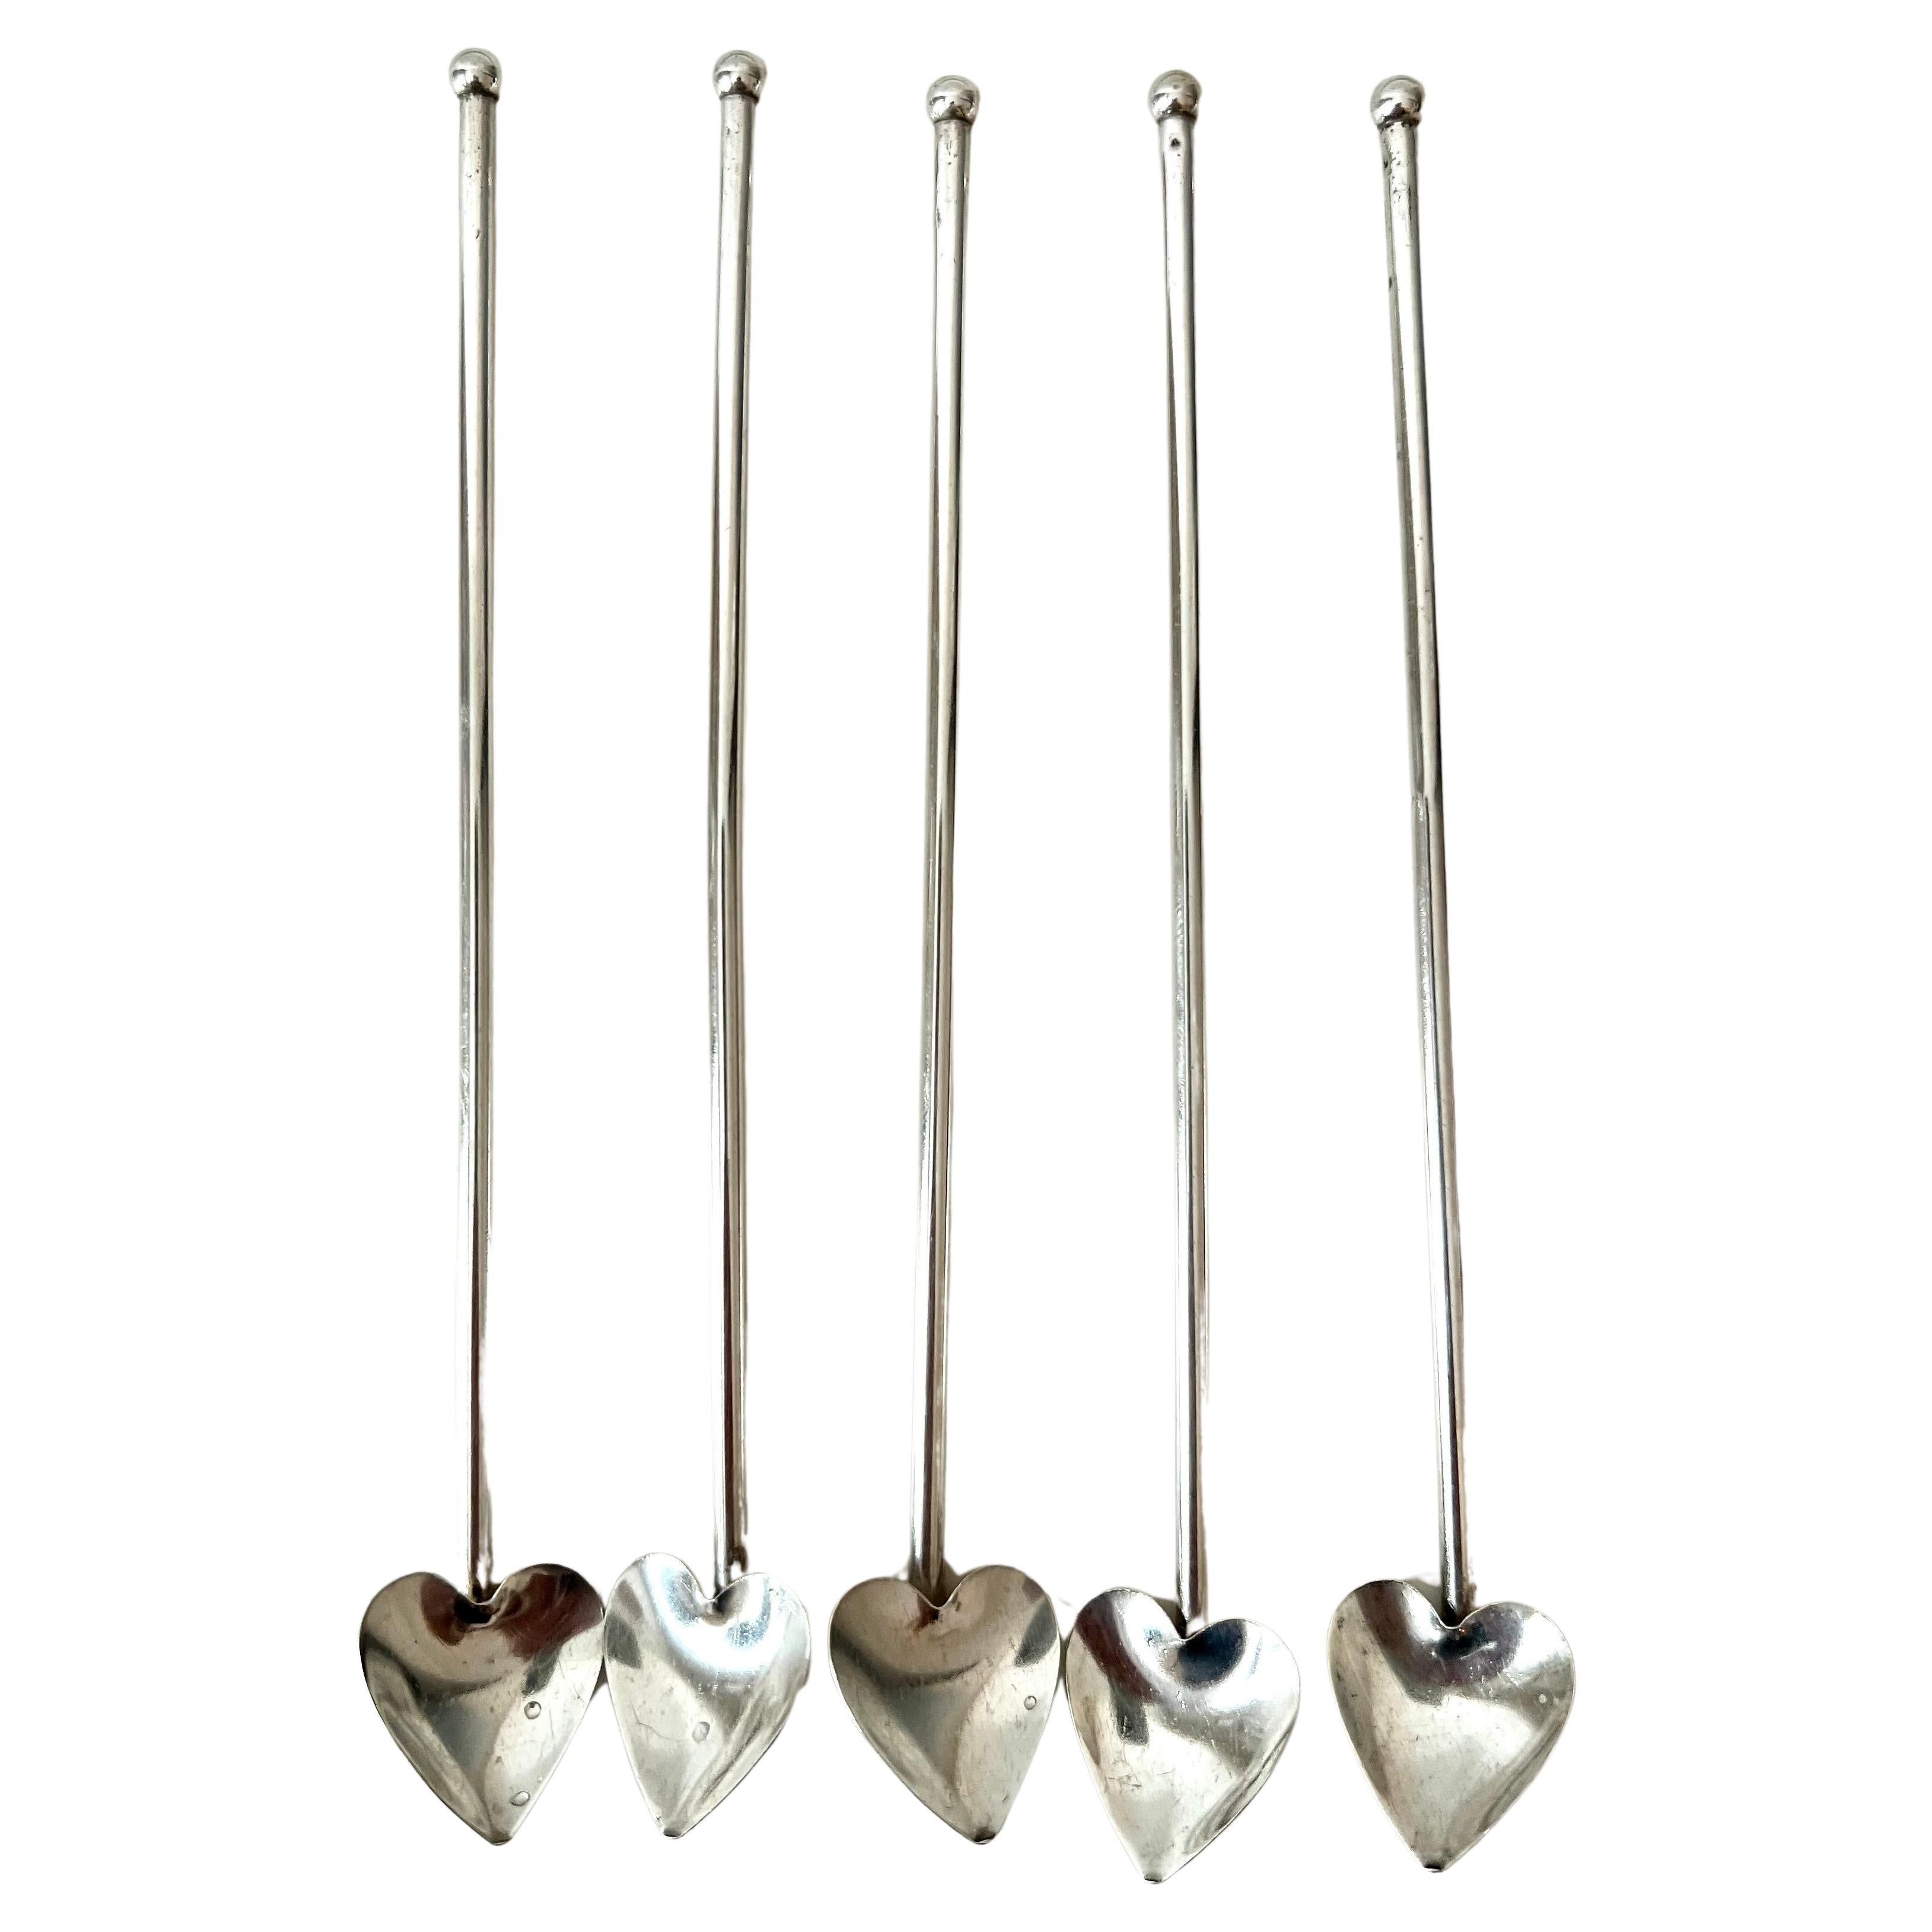 5 French Sterling Tea Spoons with Heart Shape For Sale